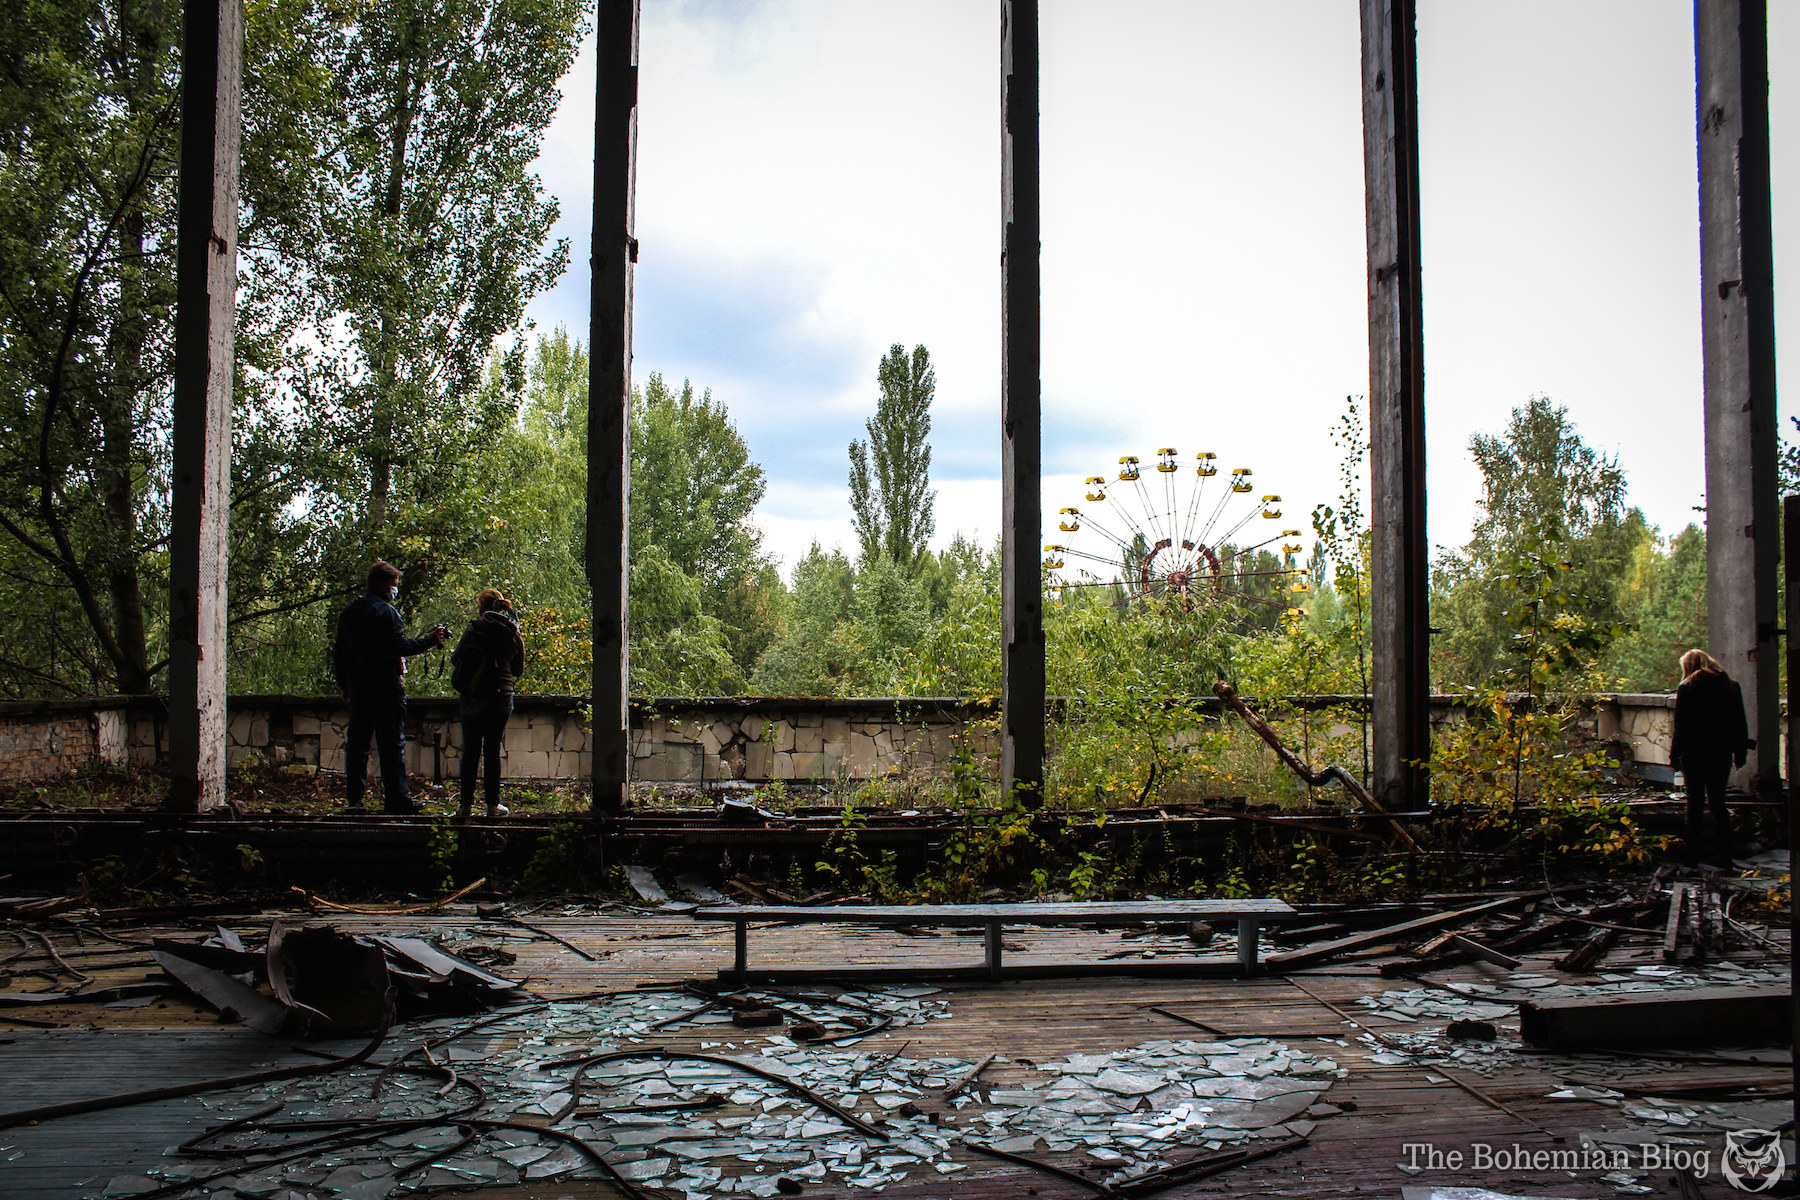 The Myth Of An Untouched Chernobyl